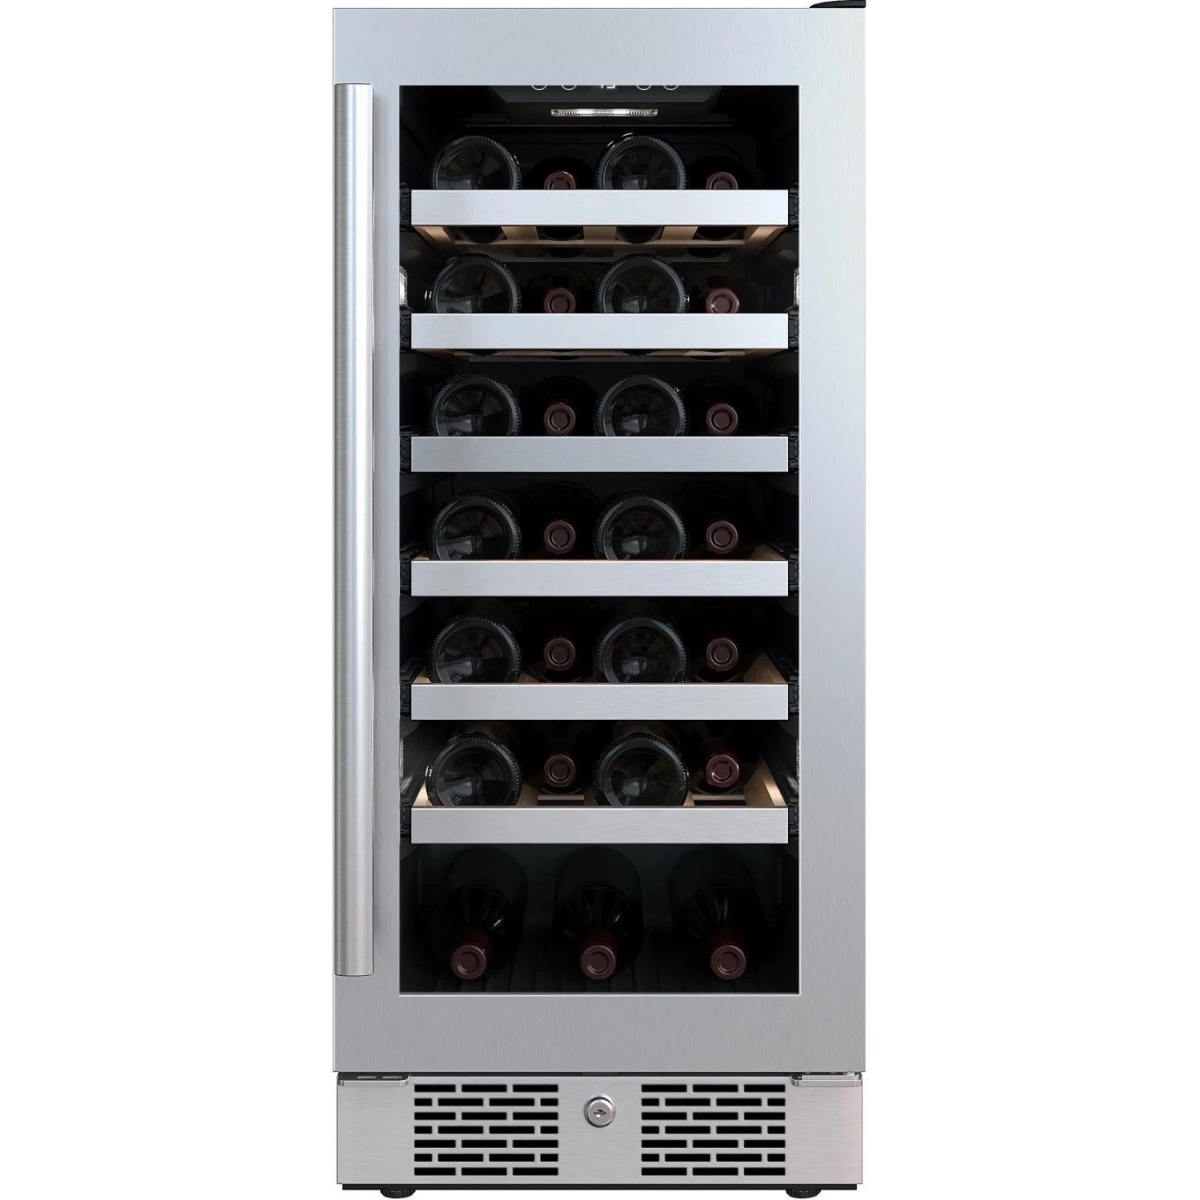 Picture of Avallon AWC152SZRH 15 in. Wide 27 Bottle Capacity Single Zone Wine Cooler with Right Swing Door, Stainless Steel - Right Hinged